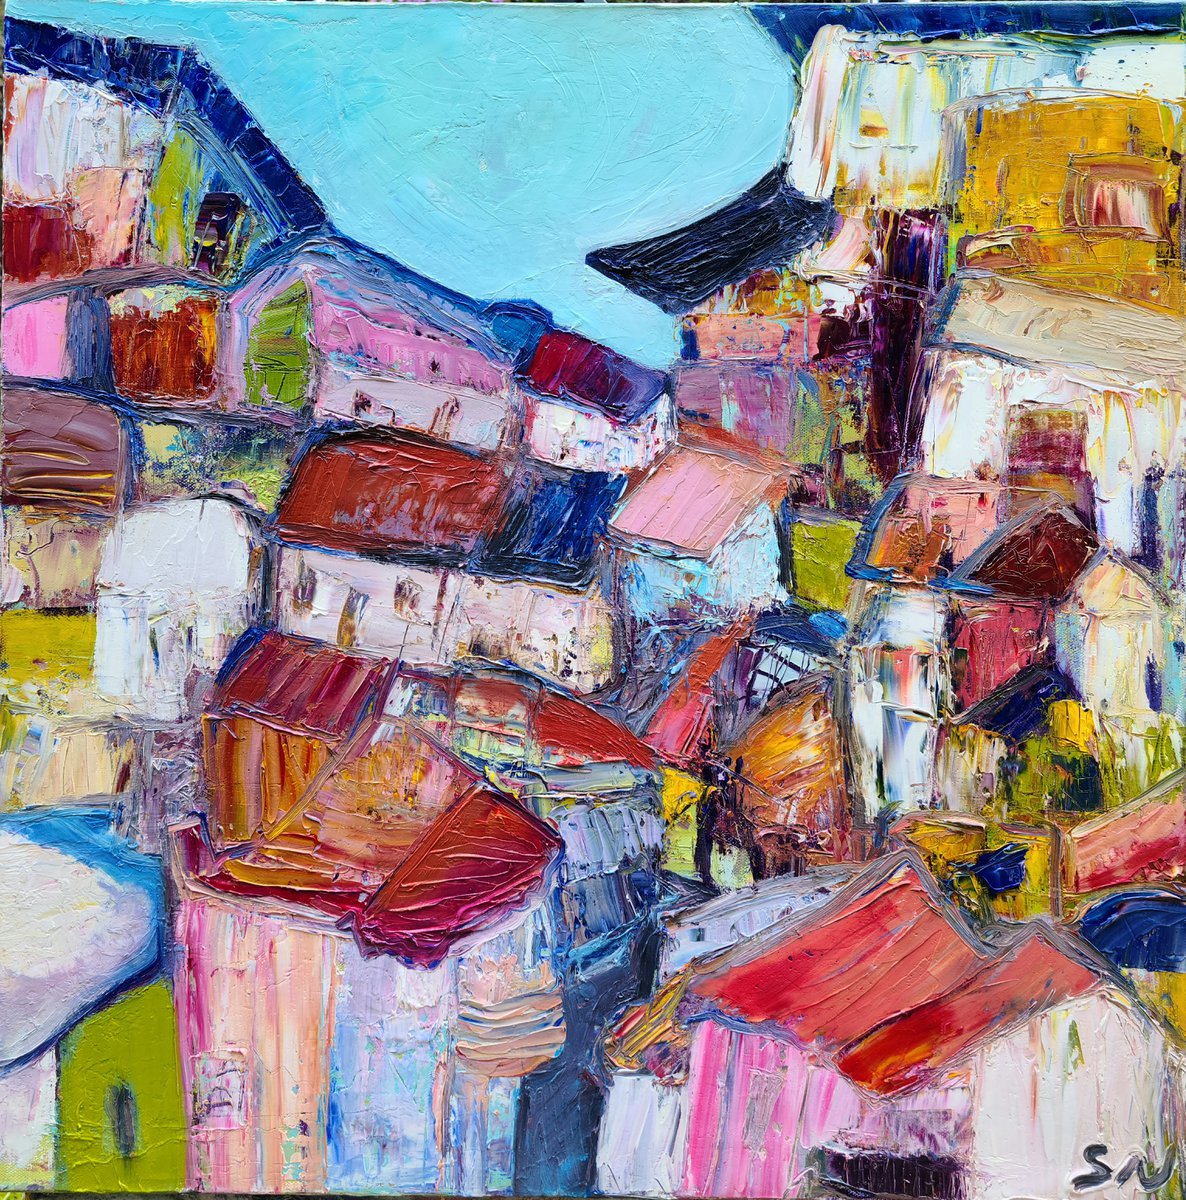 Abstract village by Stacy Neasham